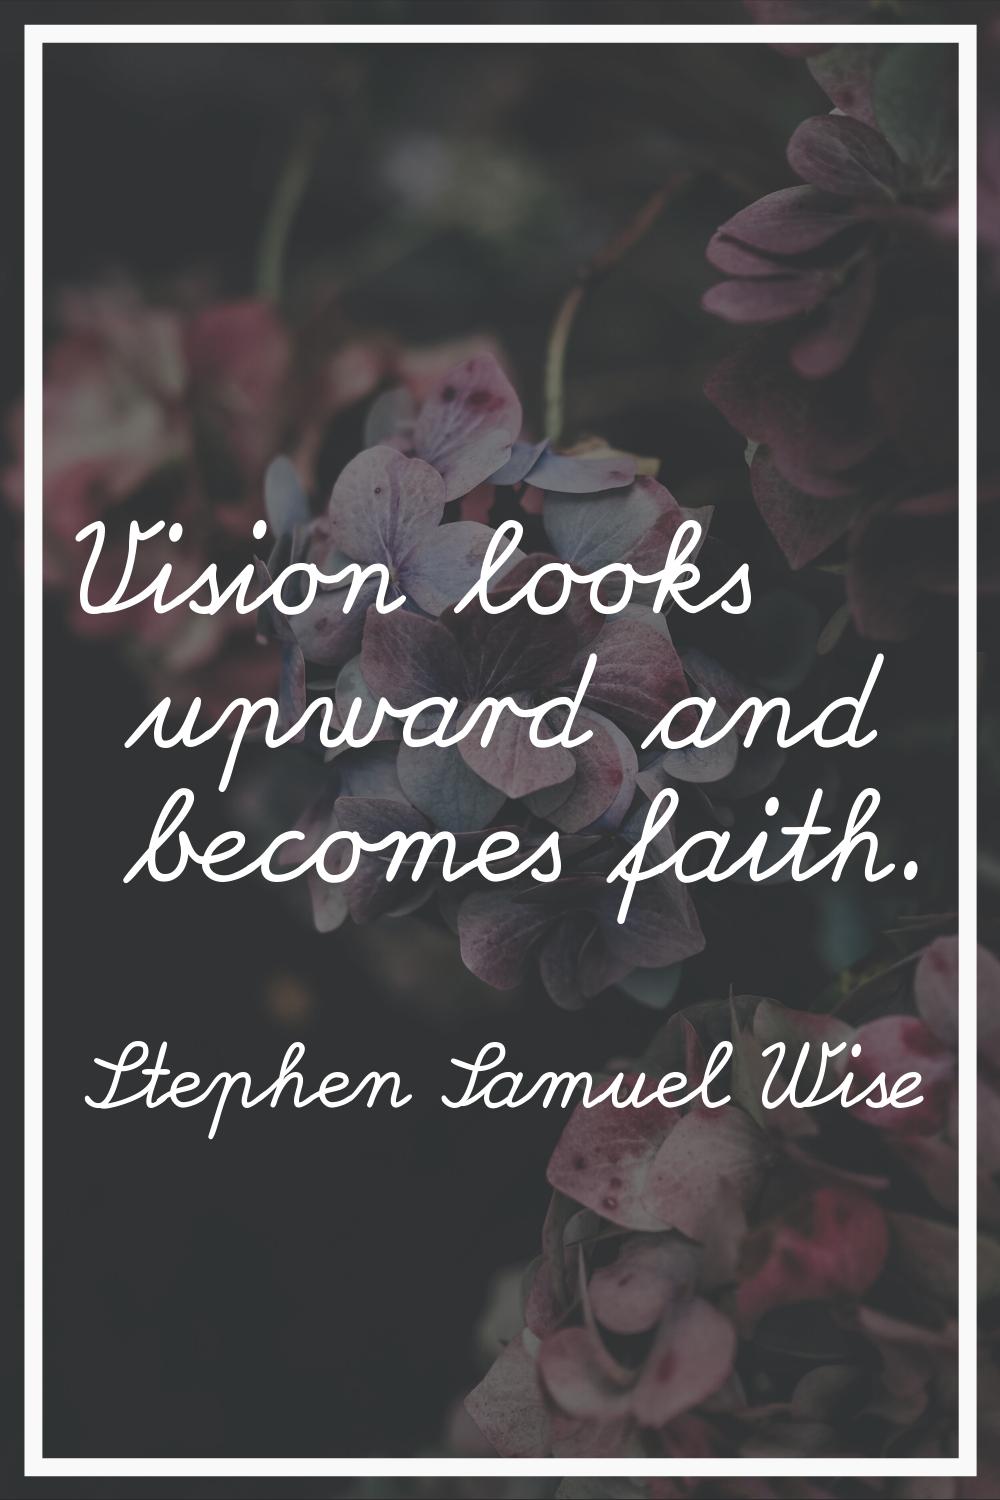 Vision looks upward and becomes faith.